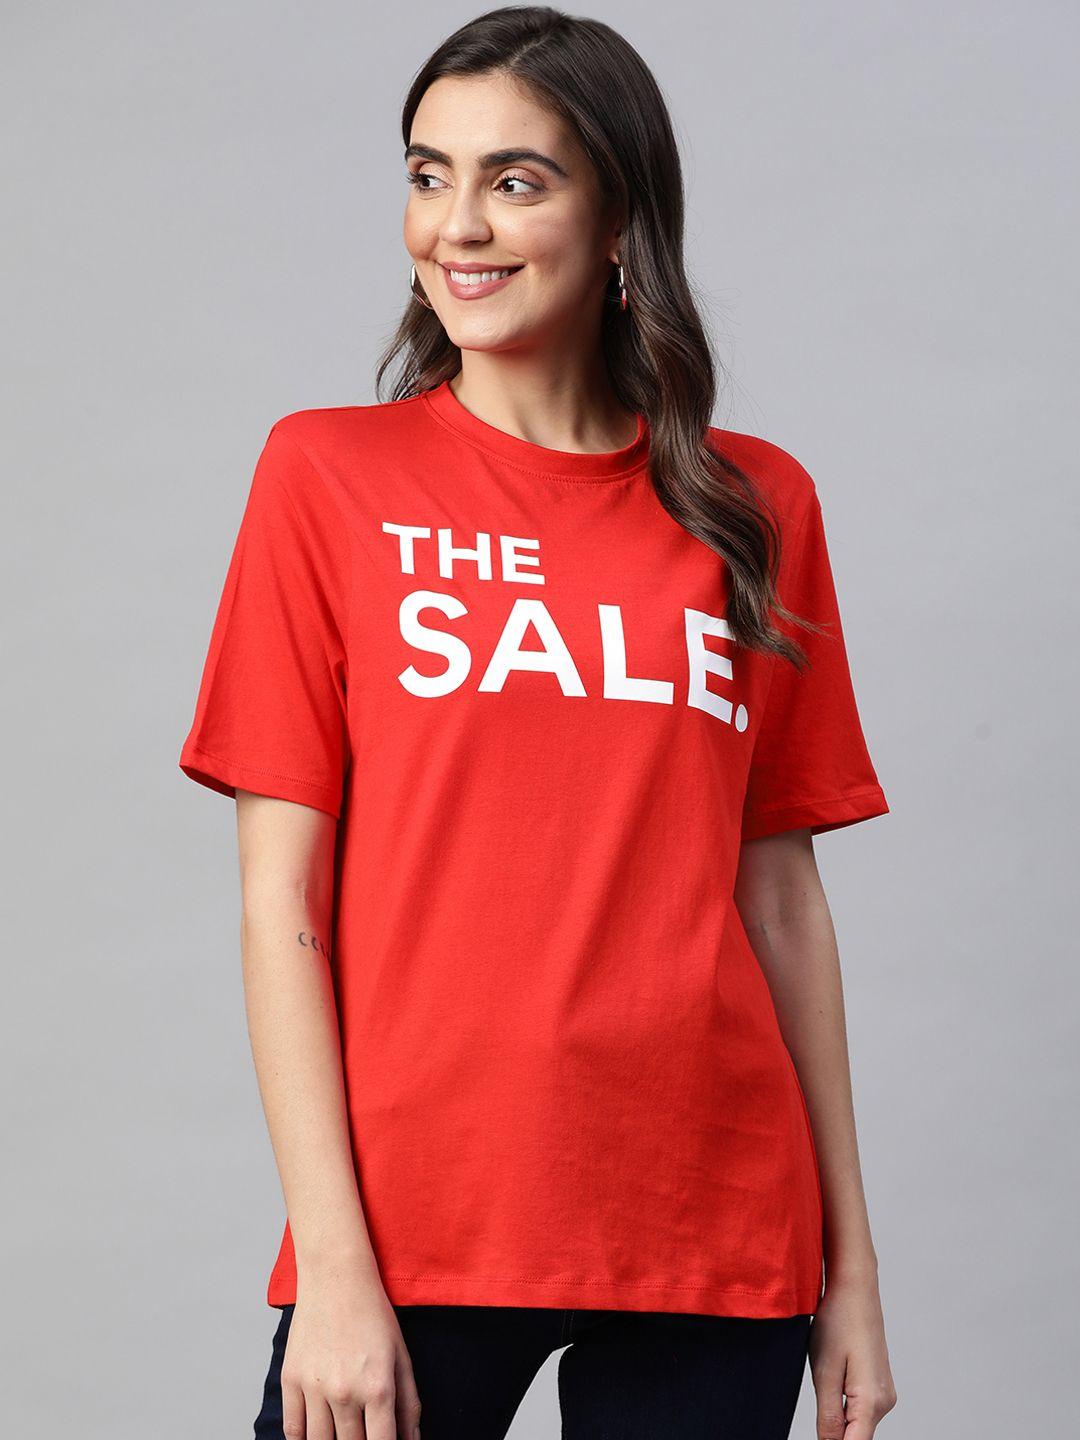 marks & spencer women red & white typography printed pure cotton t-shirt